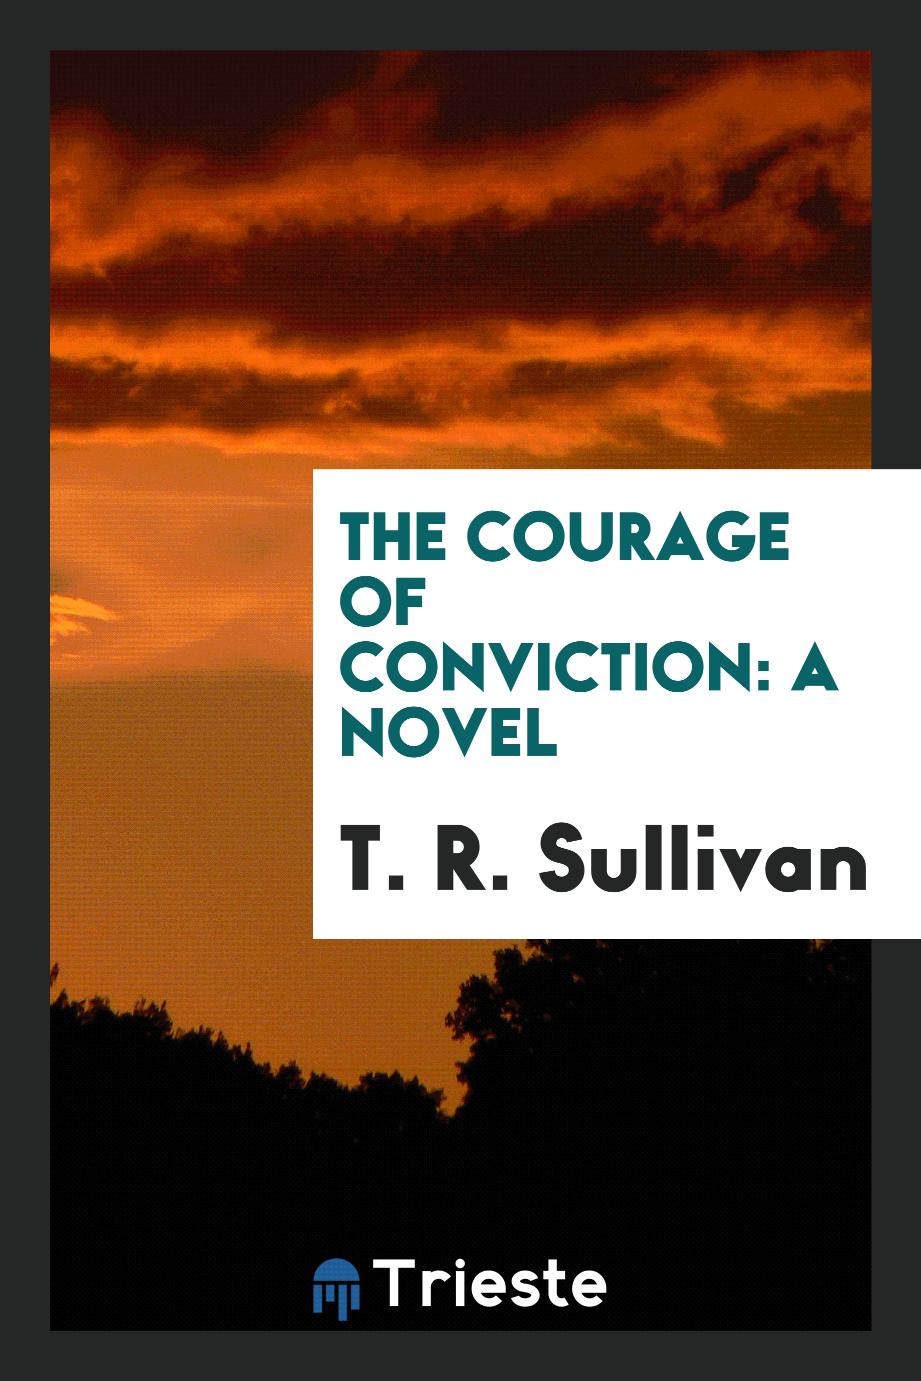 The Courage of Conviction: A Novel